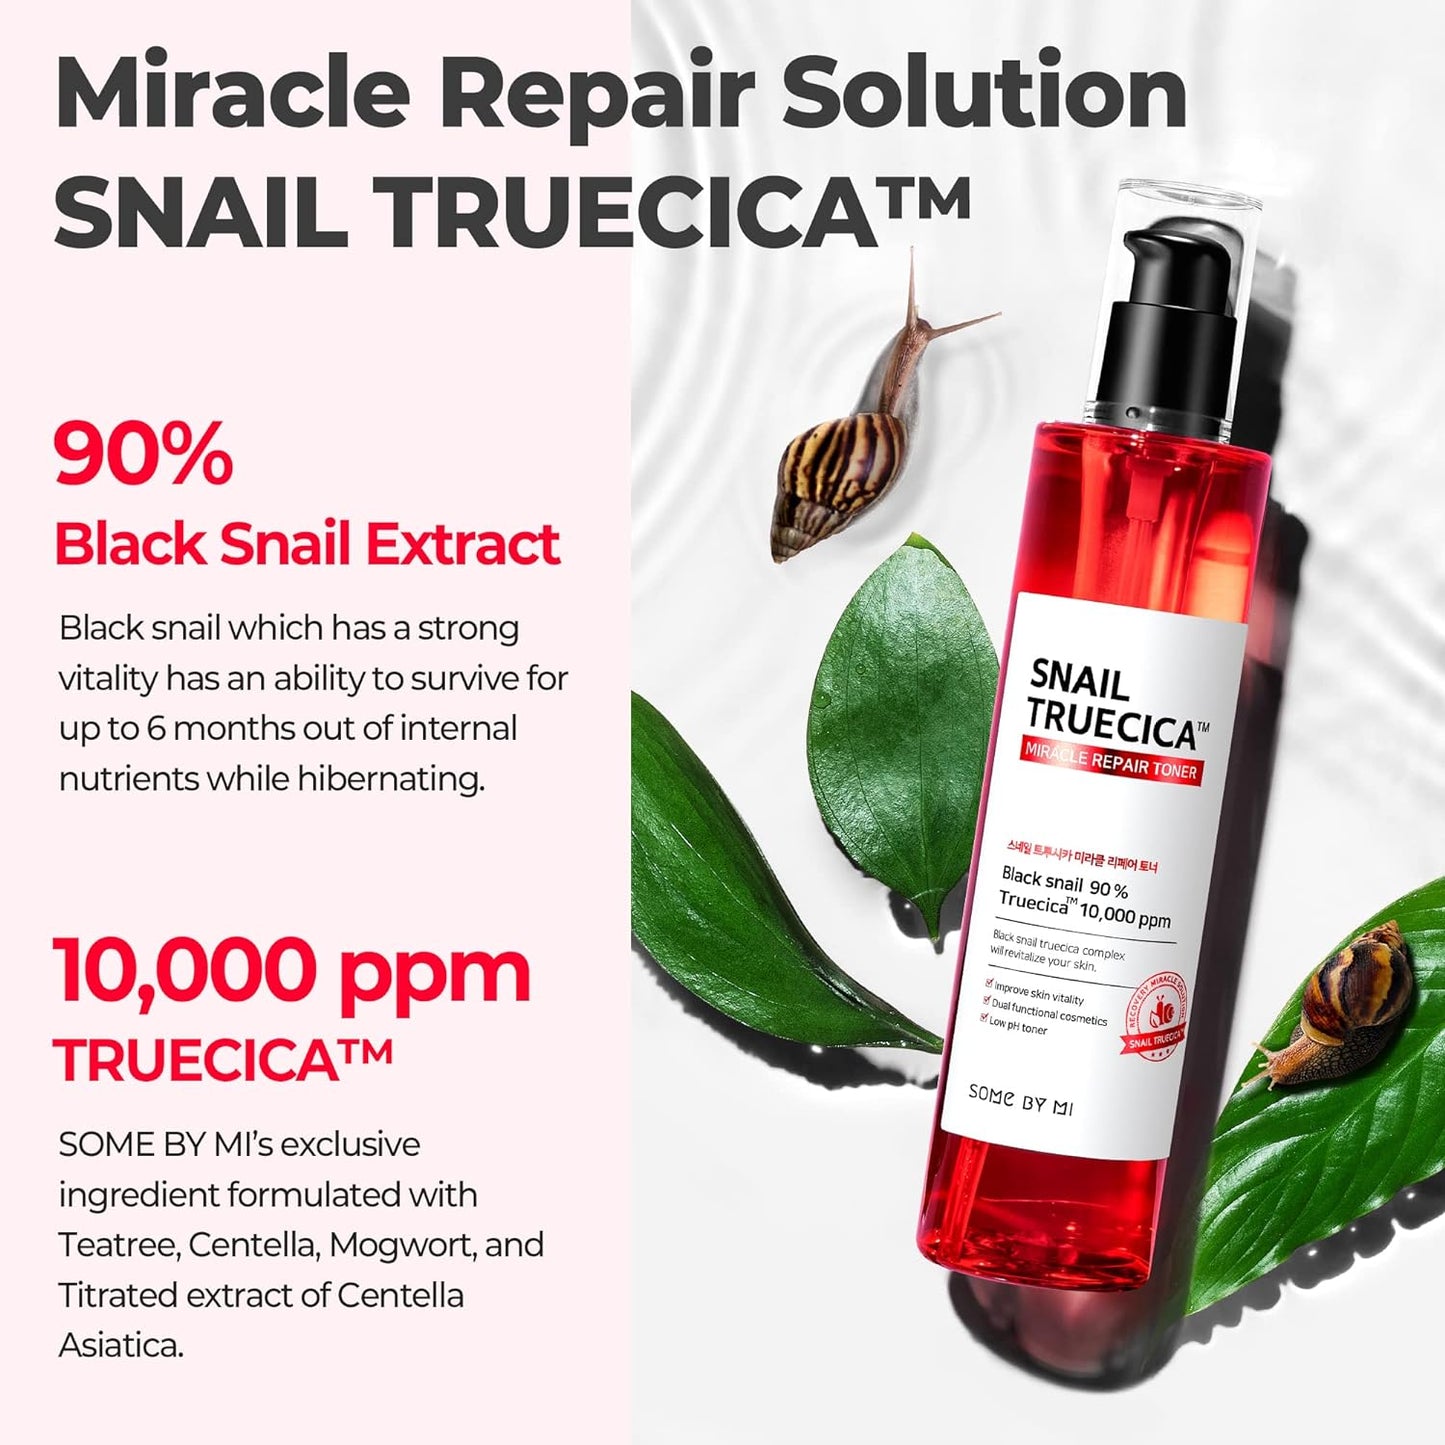 SOME BY MI Snail Truecica Miracle Repair Toner SOME BY MI